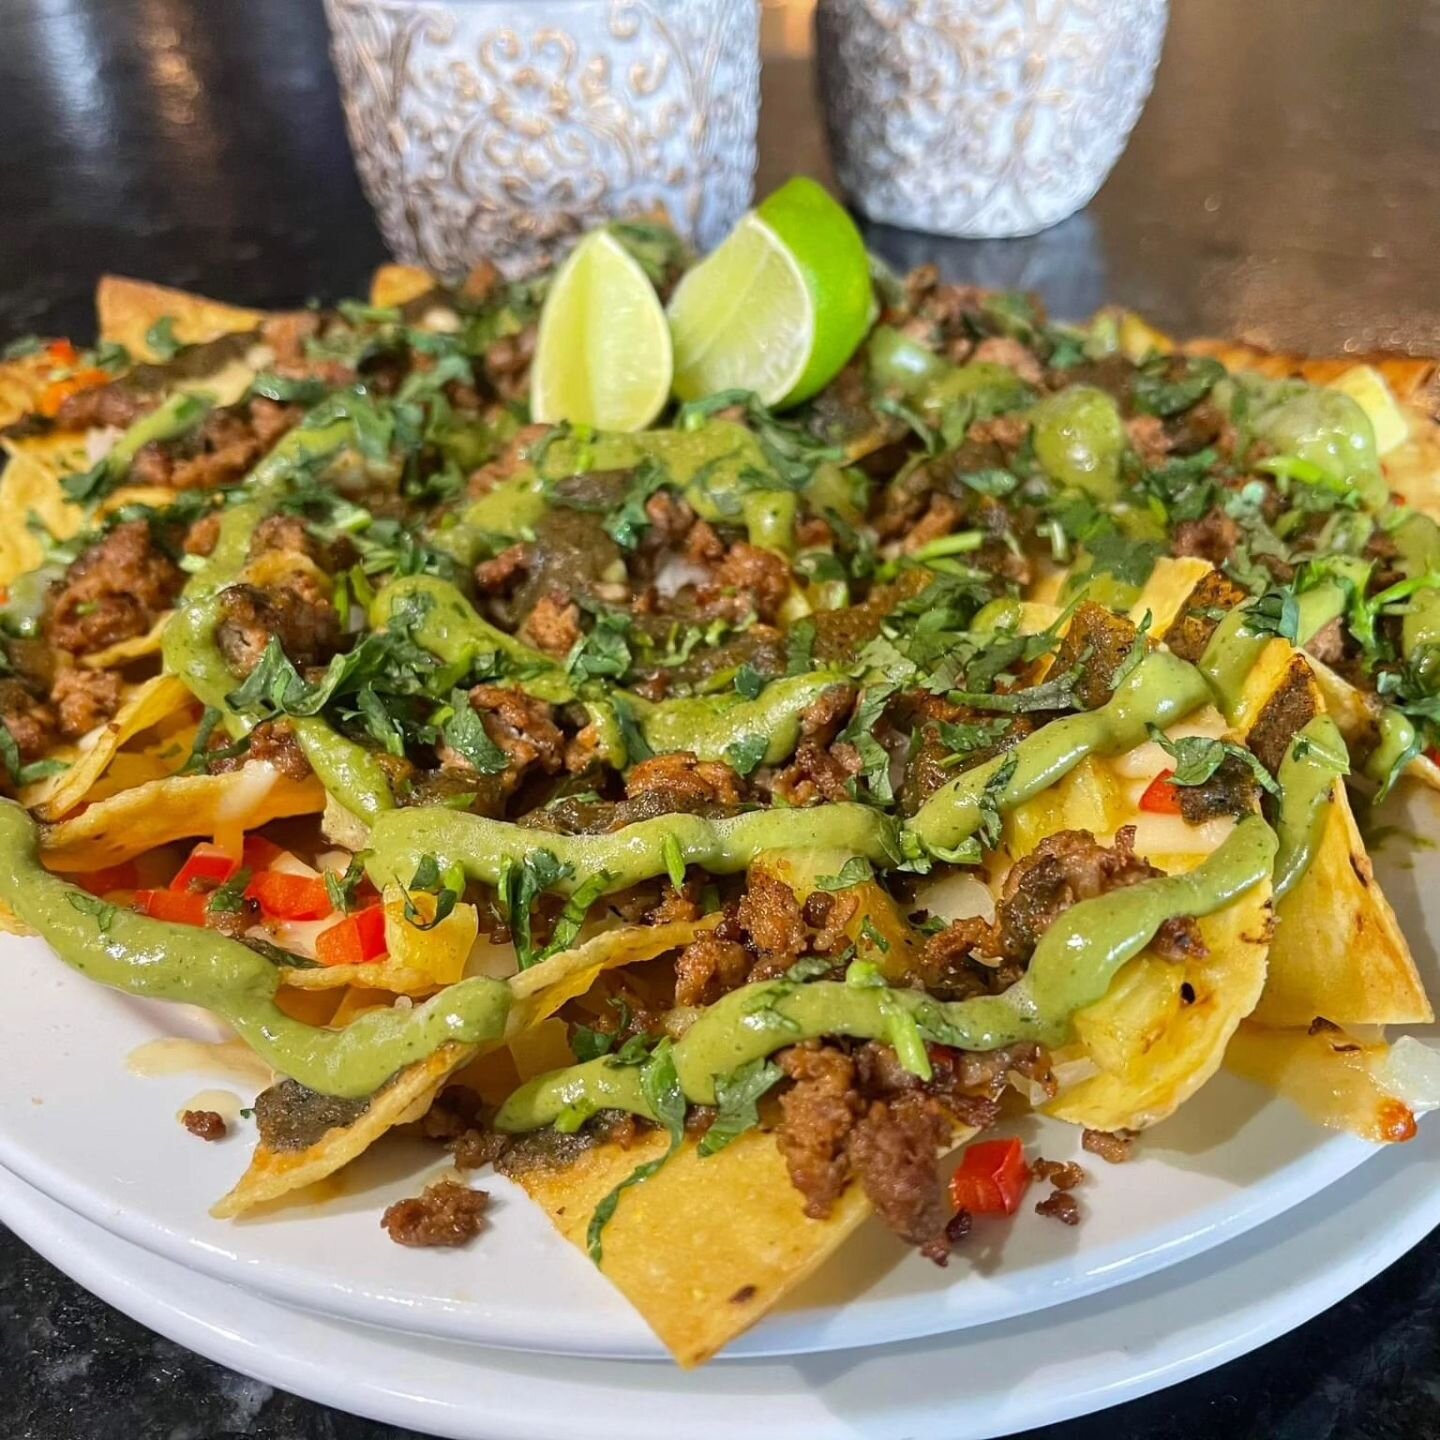 Nacho Week has officially just begun and we're thrilled to be a part of it! Come try our irresistible Mexican Street Nachos, exclusively crafted for this event. 🇲🇽

Our nachos are made with crispy corn chips, juicy grilled pineapple, savoury Mexica